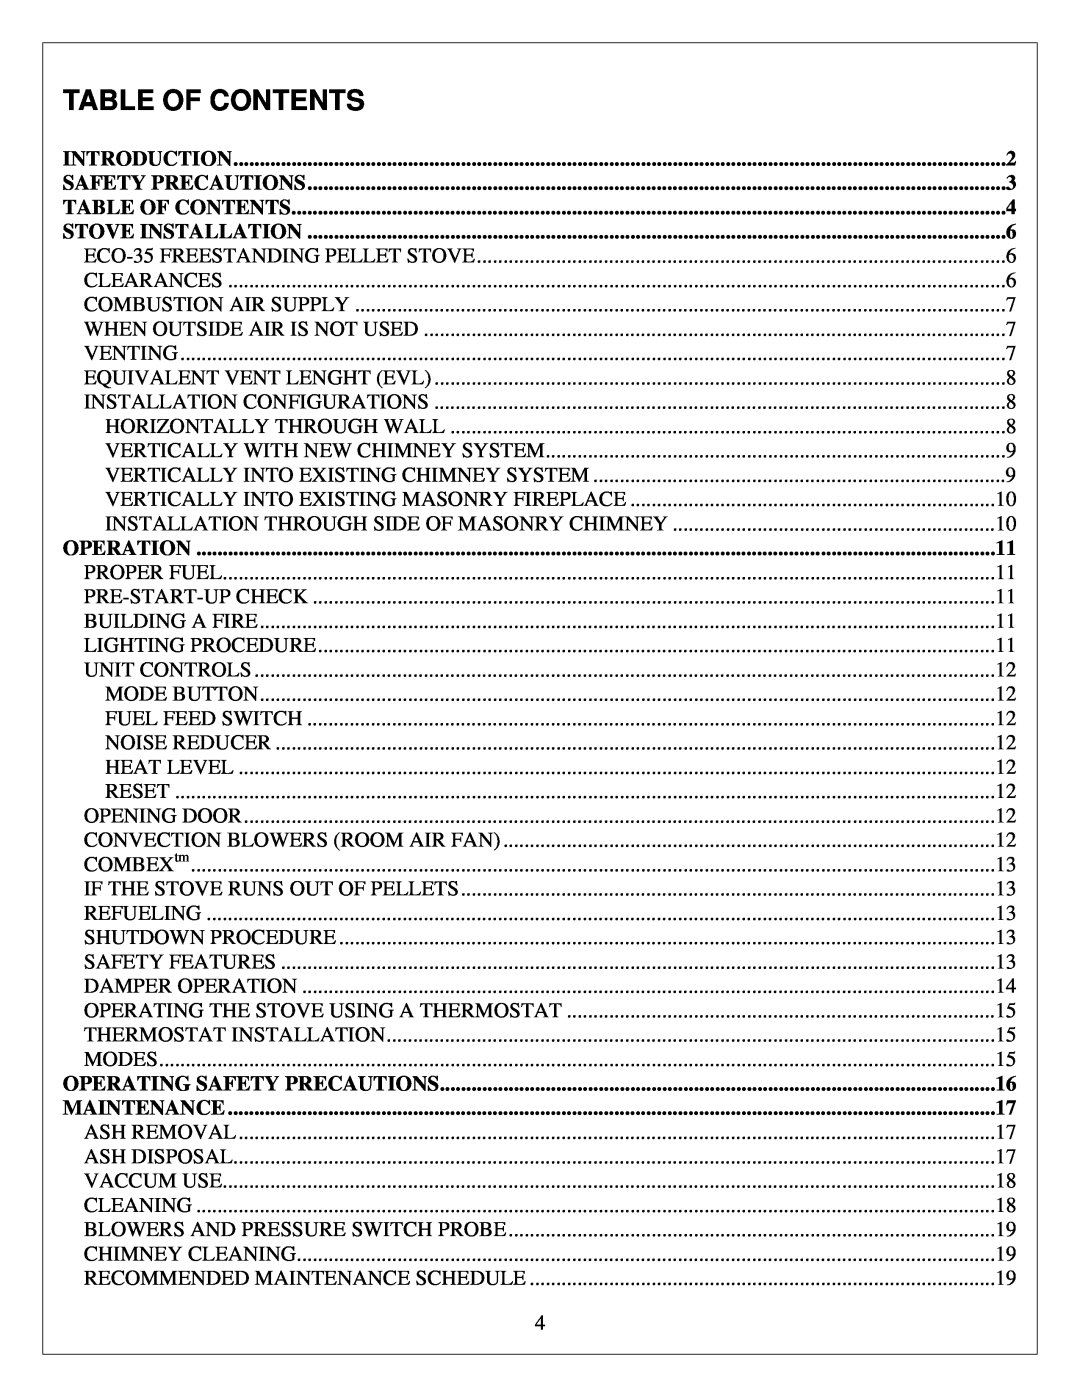 Drolet ECO-35 owner manual Table Of Contents, Operation, Operating Safety Precautions, Maintenance 